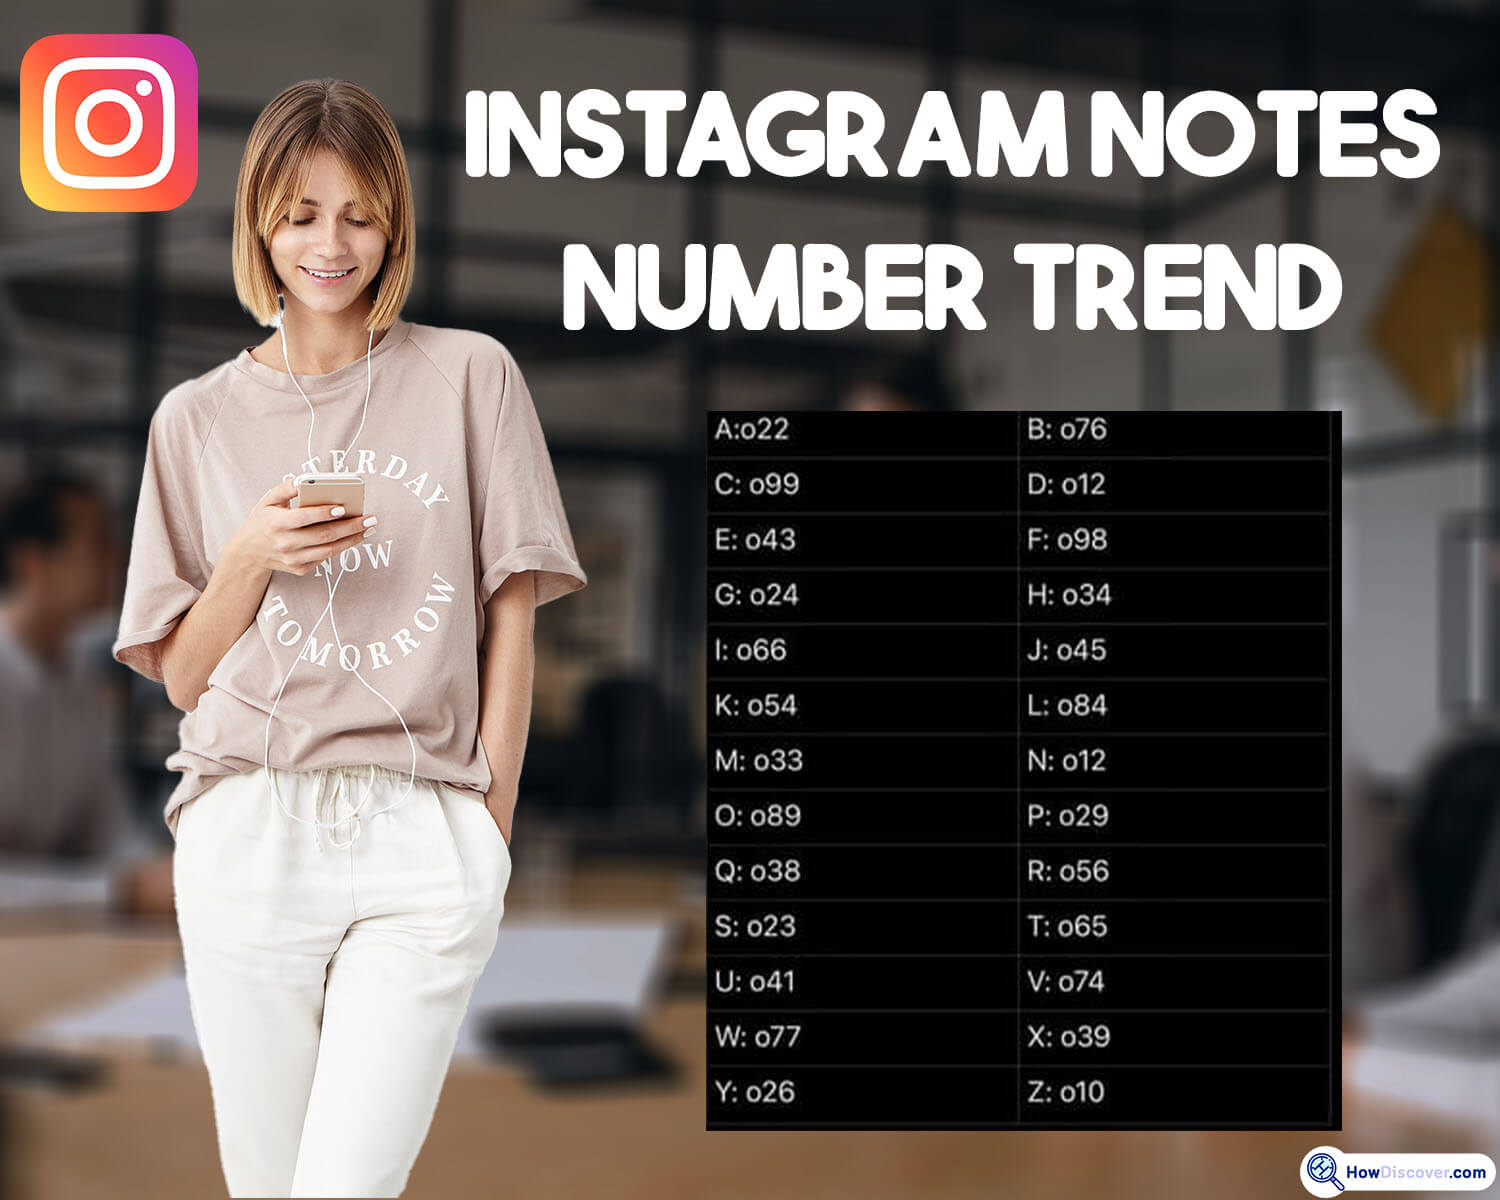 What is the Instagram Notes Number Trend?